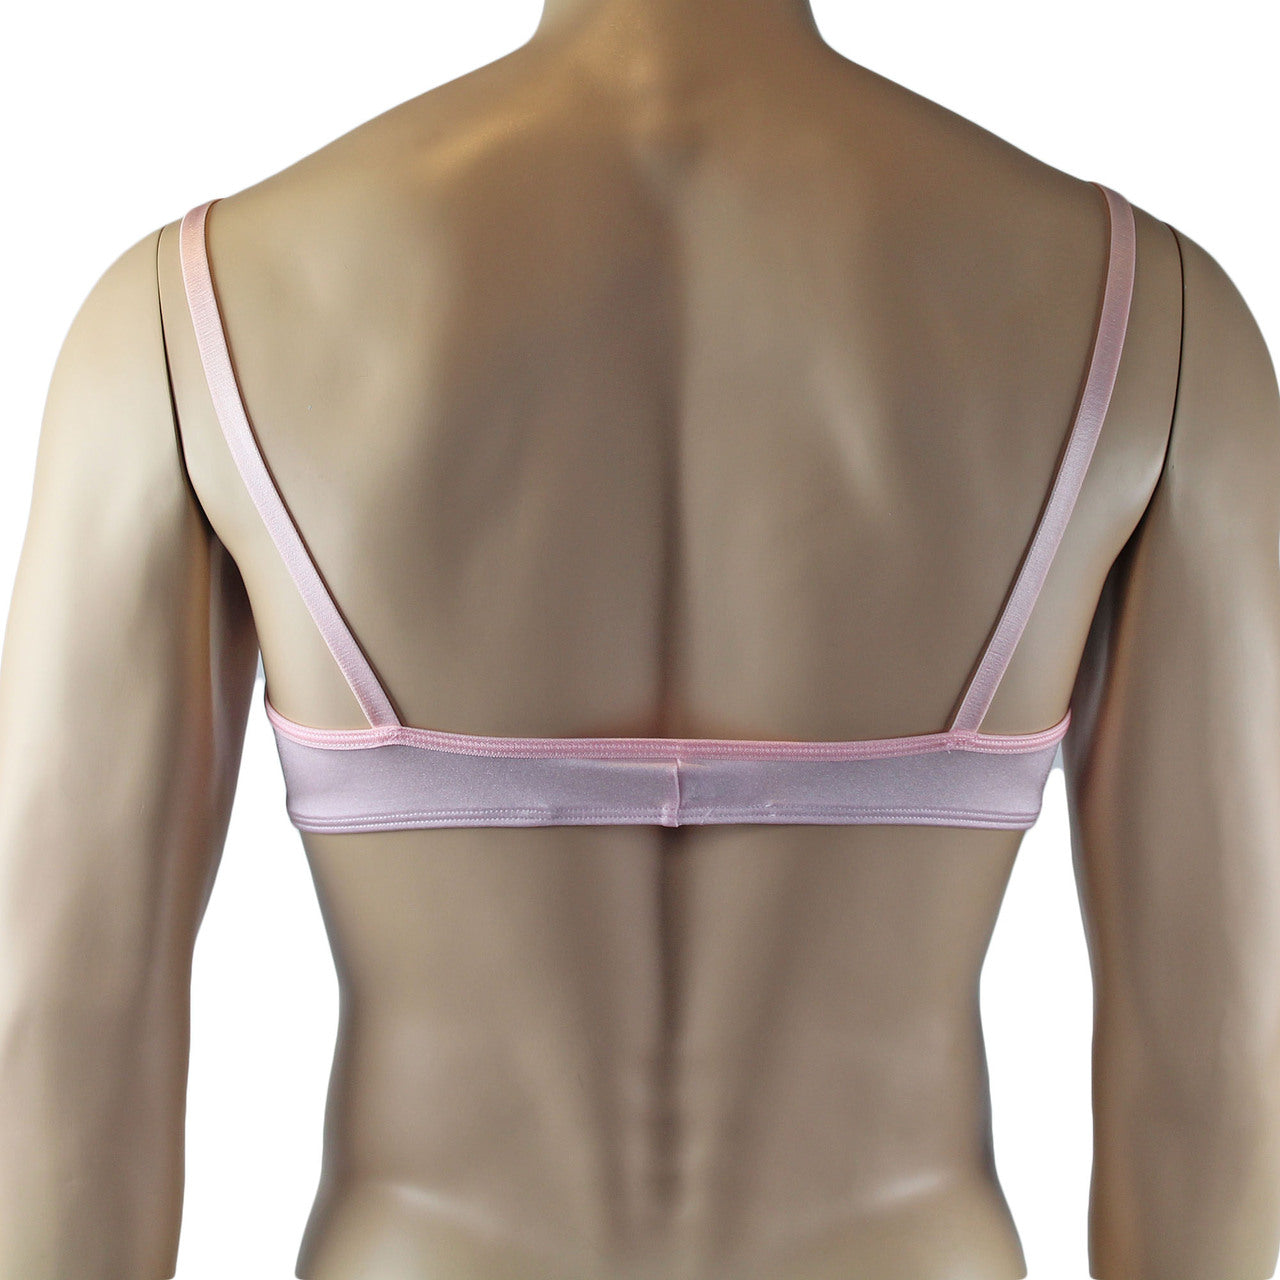 Mens Luxury Bra Top with Beautiful Lace Male Lingerie (pink plus other colours)